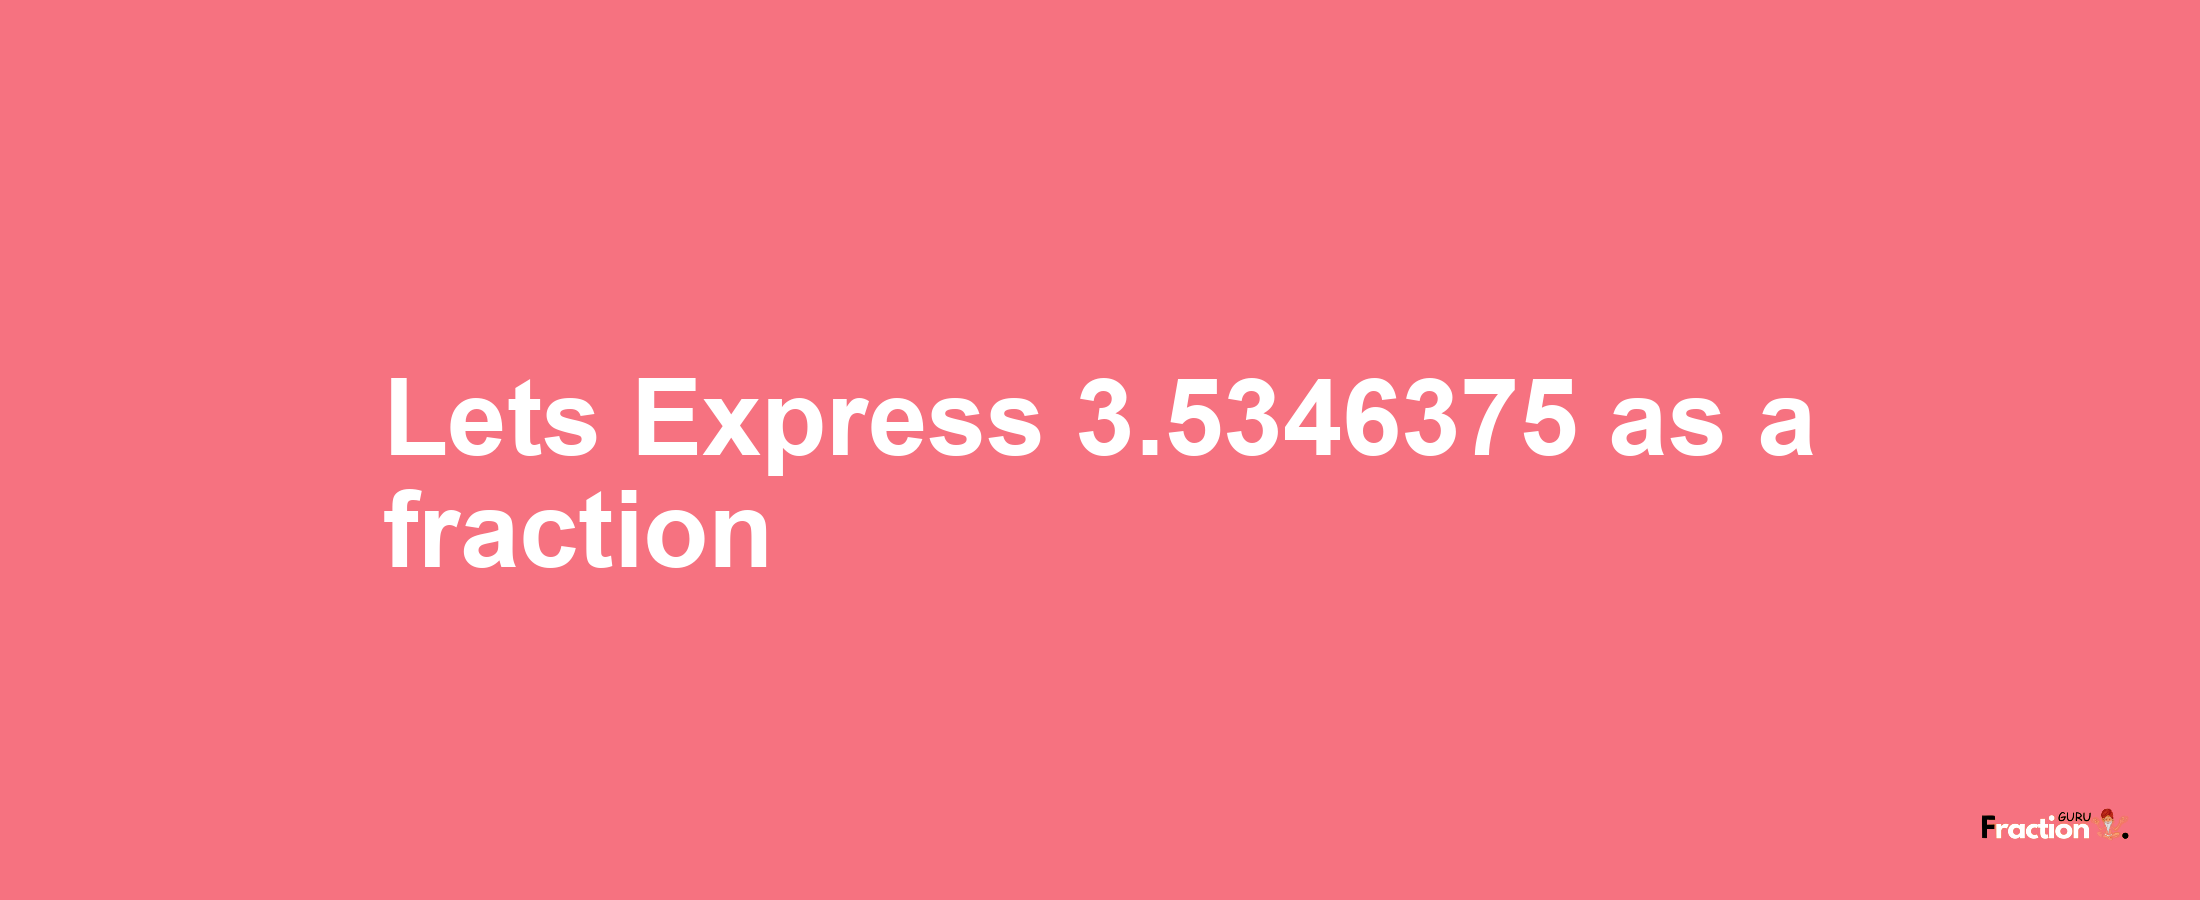 Lets Express 3.5346375 as afraction